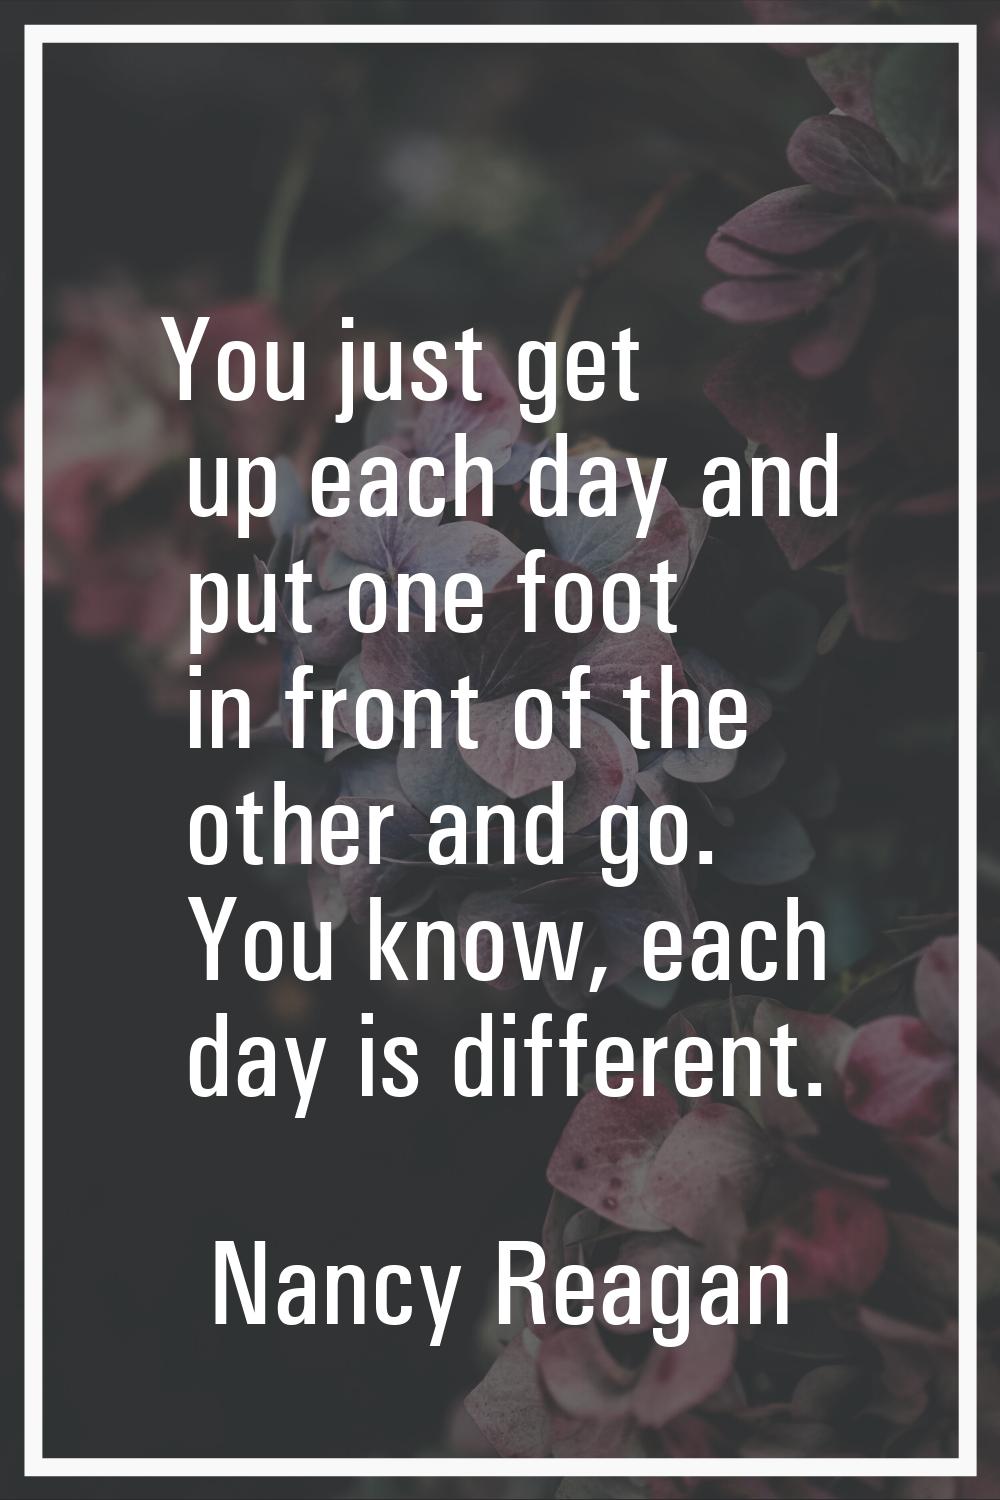 You just get up each day and put one foot in front of the other and go. You know, each day is diffe